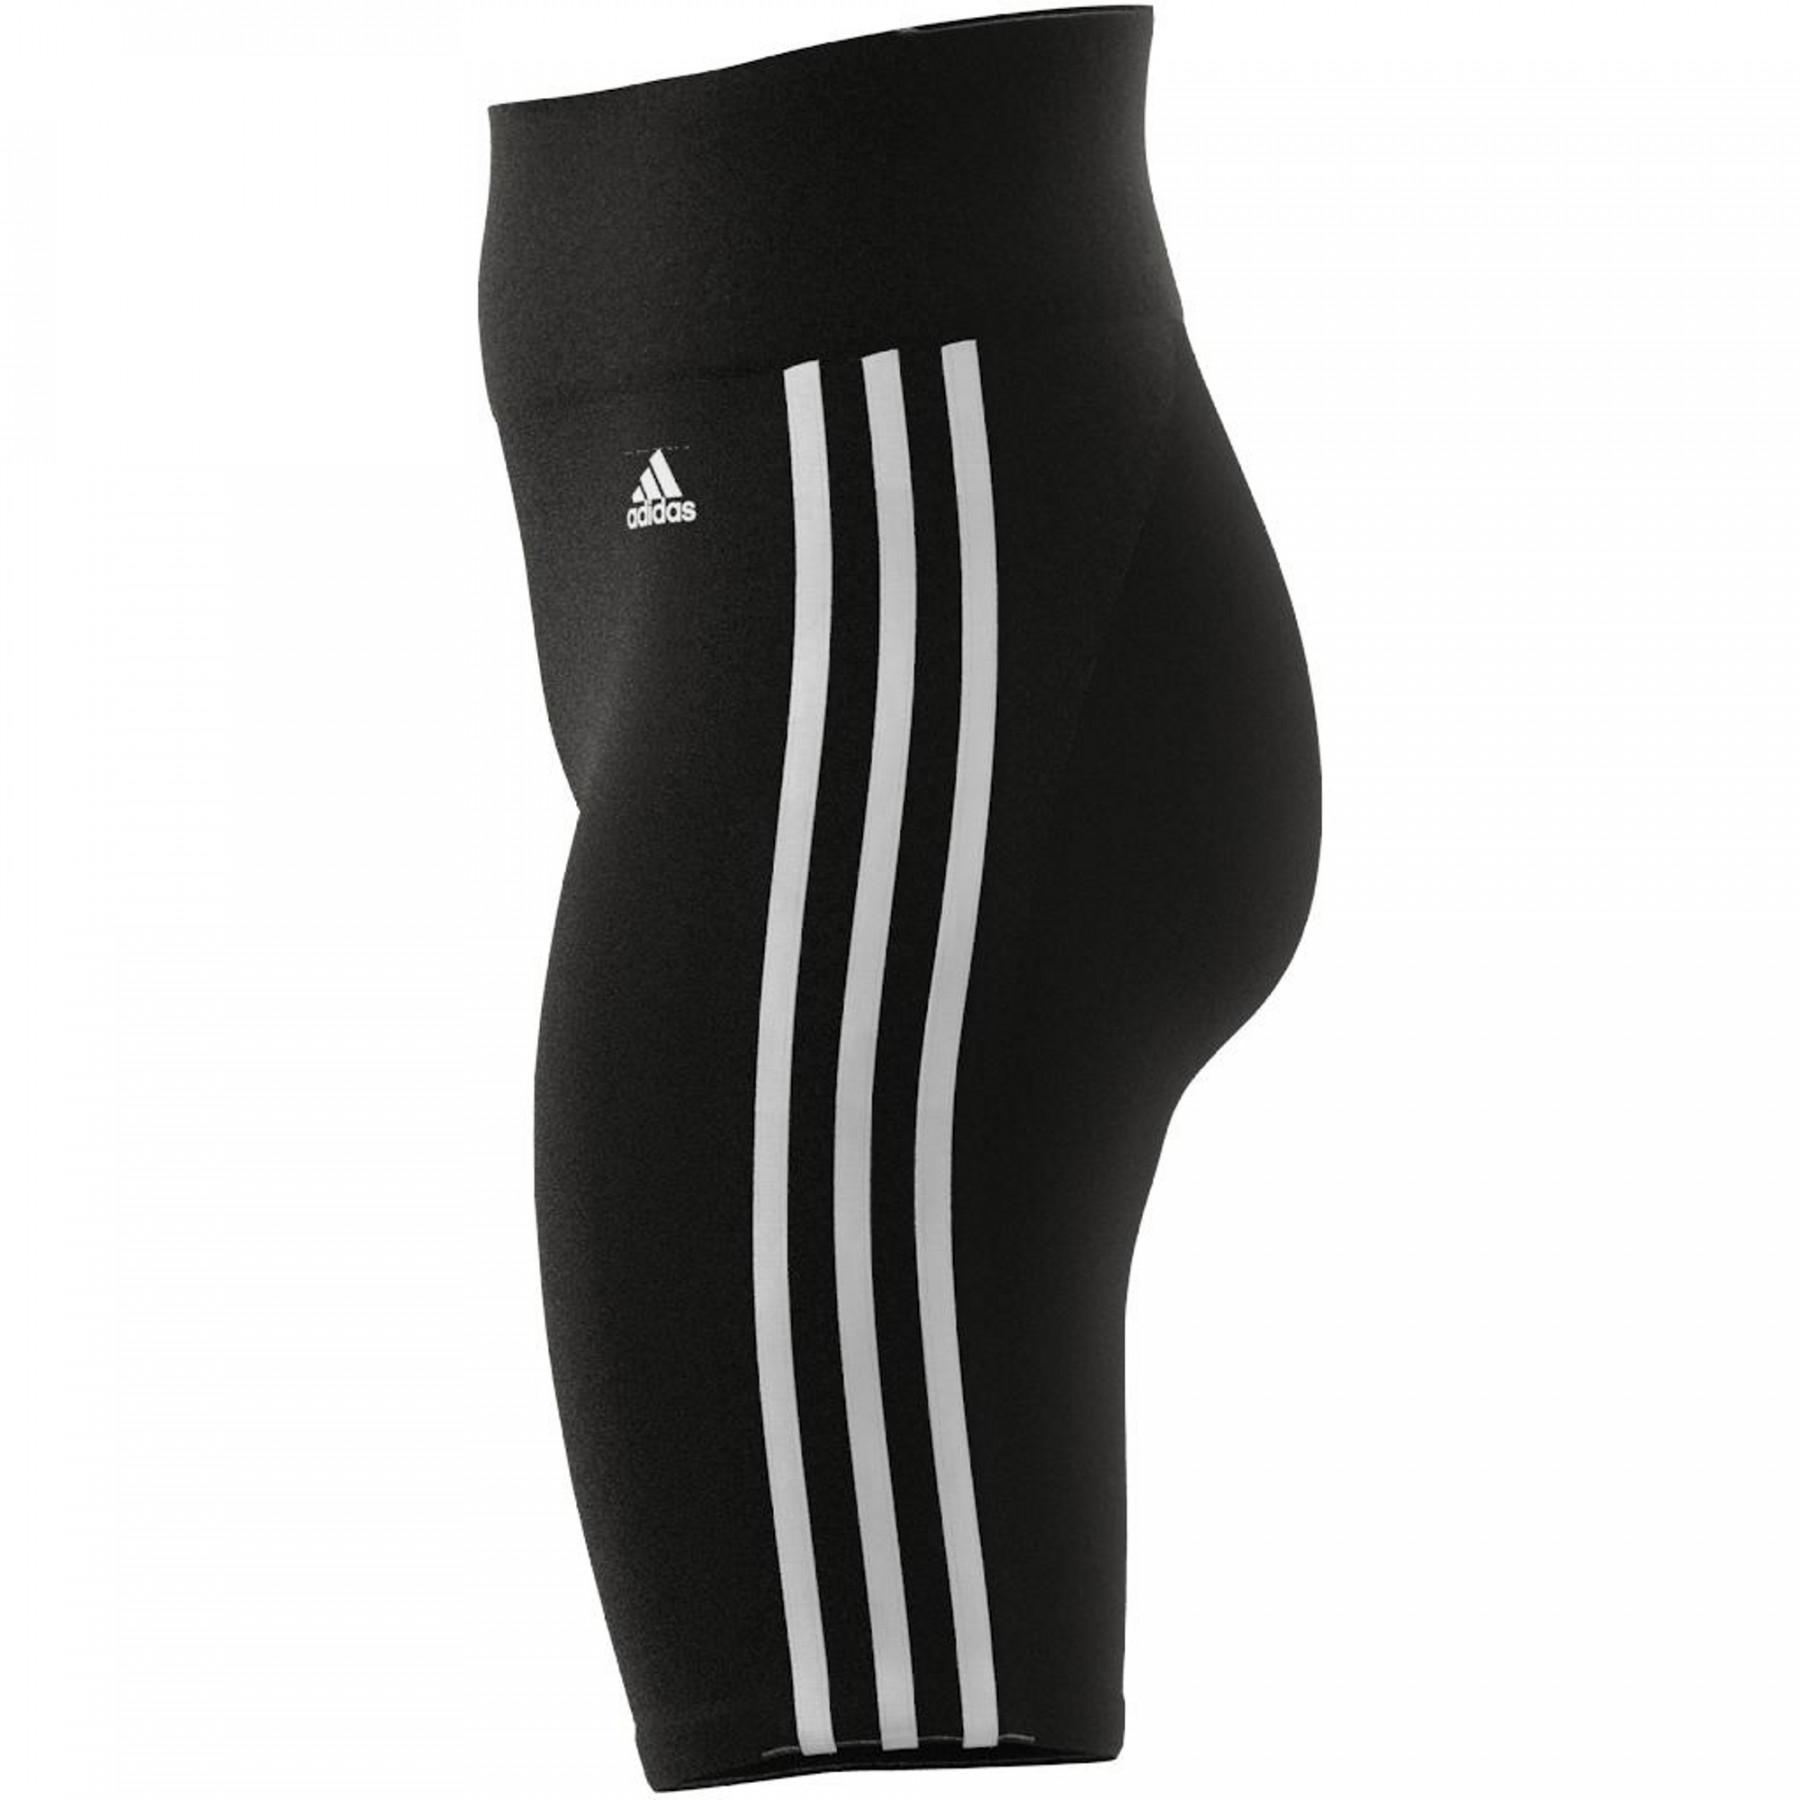 Mujer ciclista adidas Designed To Move High-Riseport